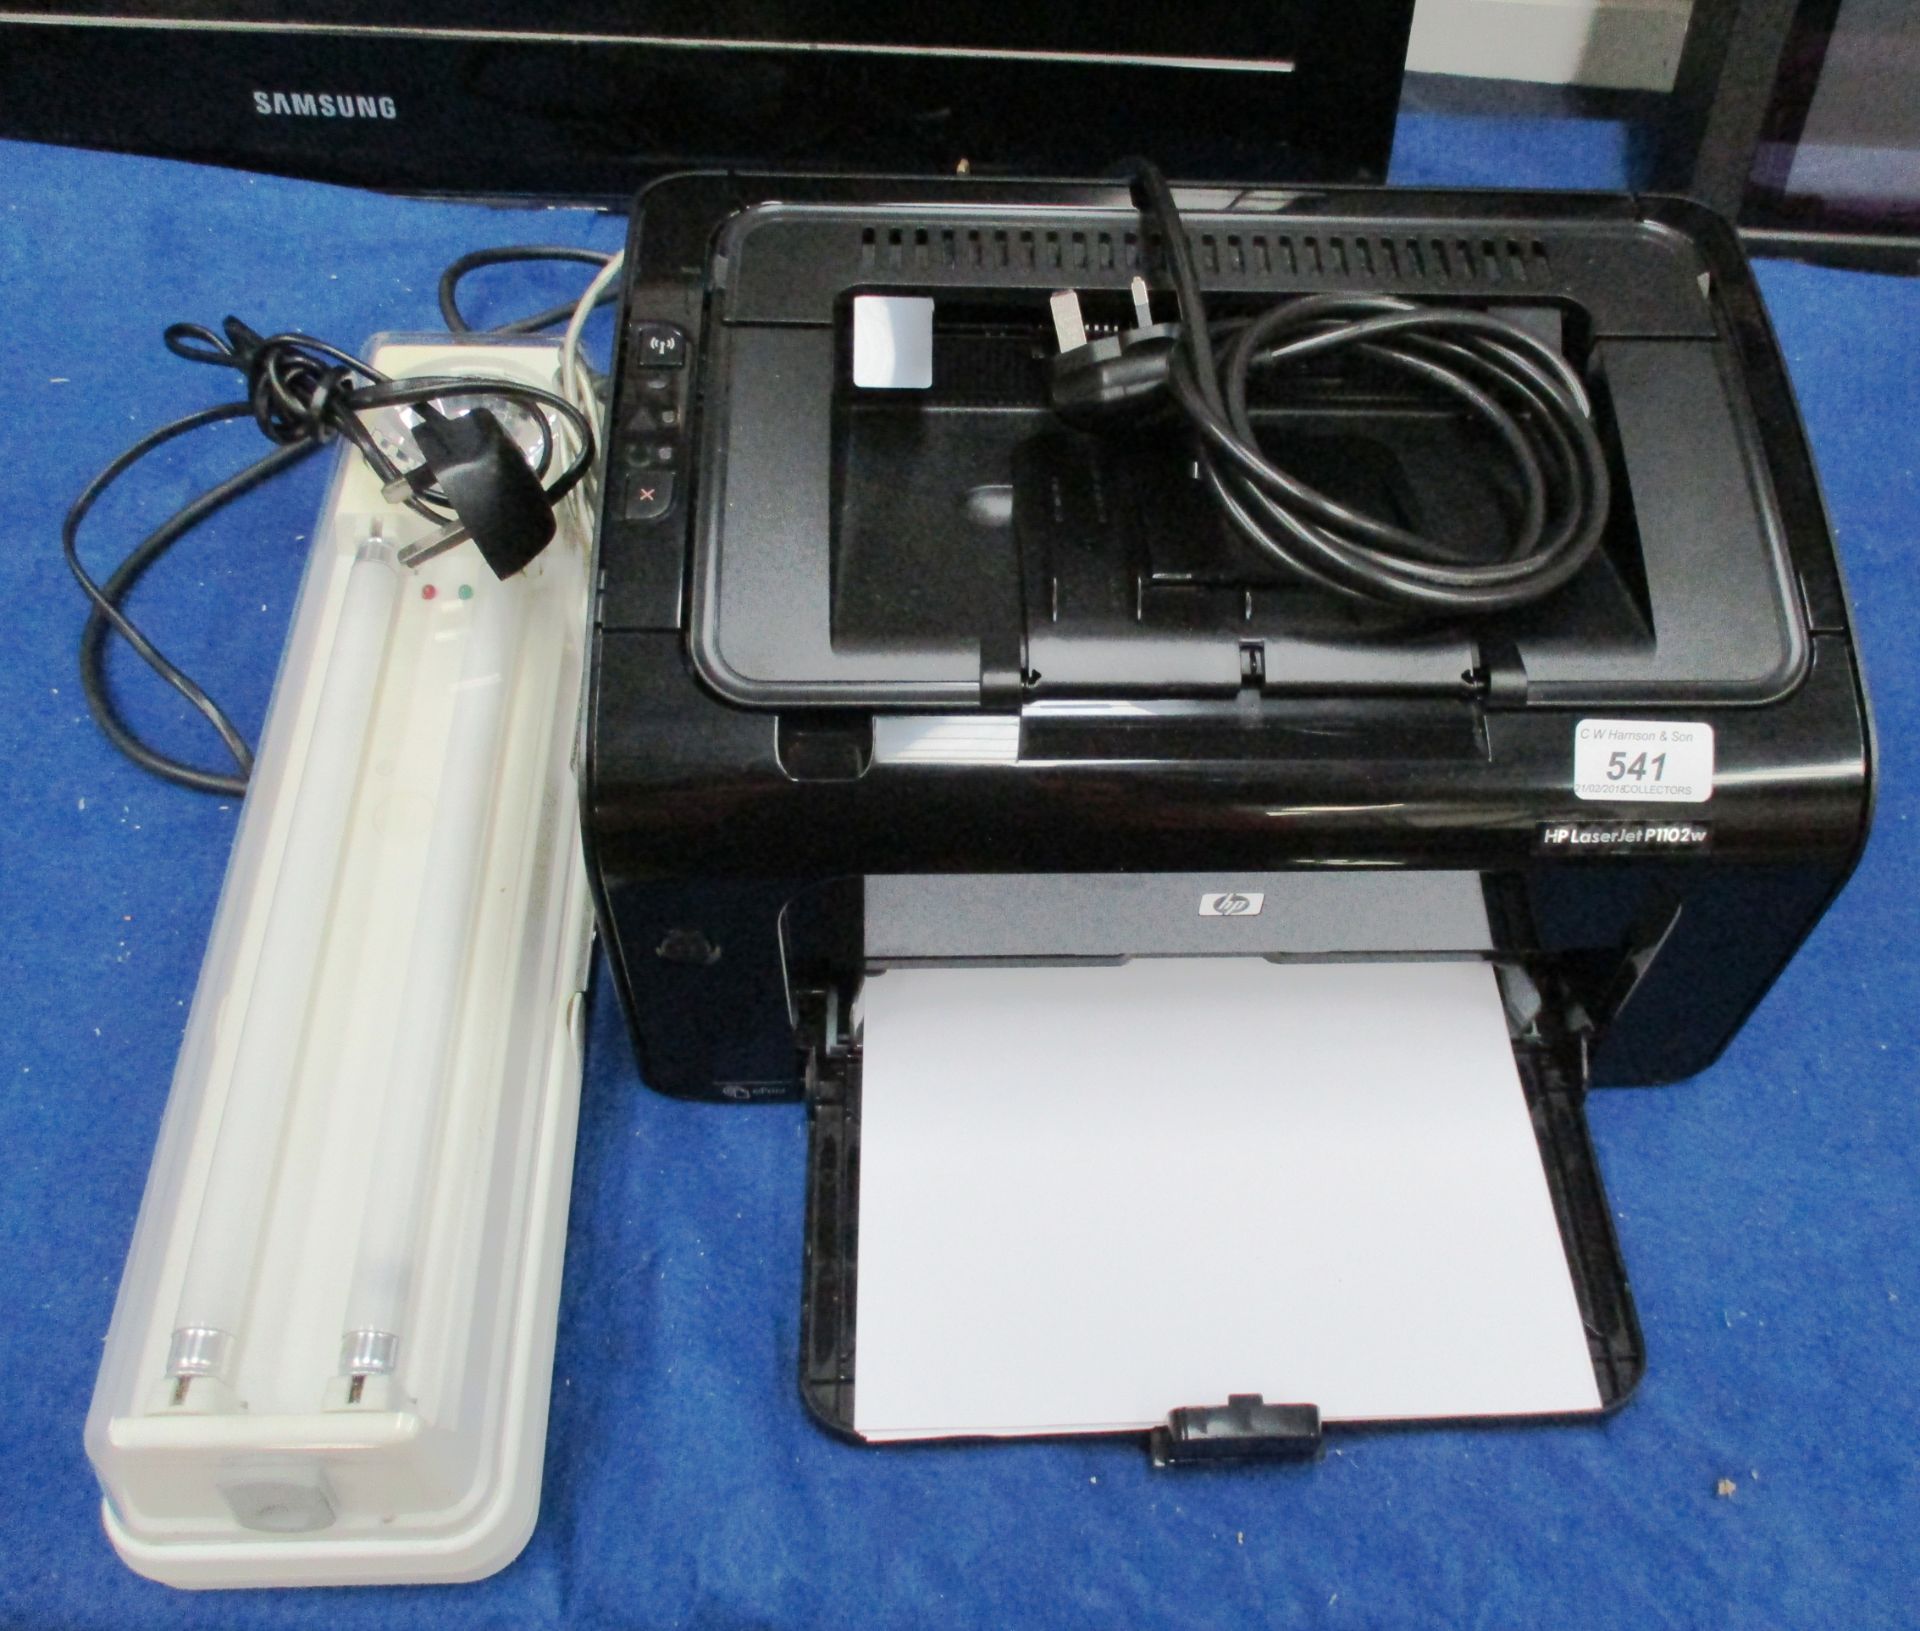 2 x items - HP Laserjet P1102W printer and a JML rechargeable fluorescent lantern together with a